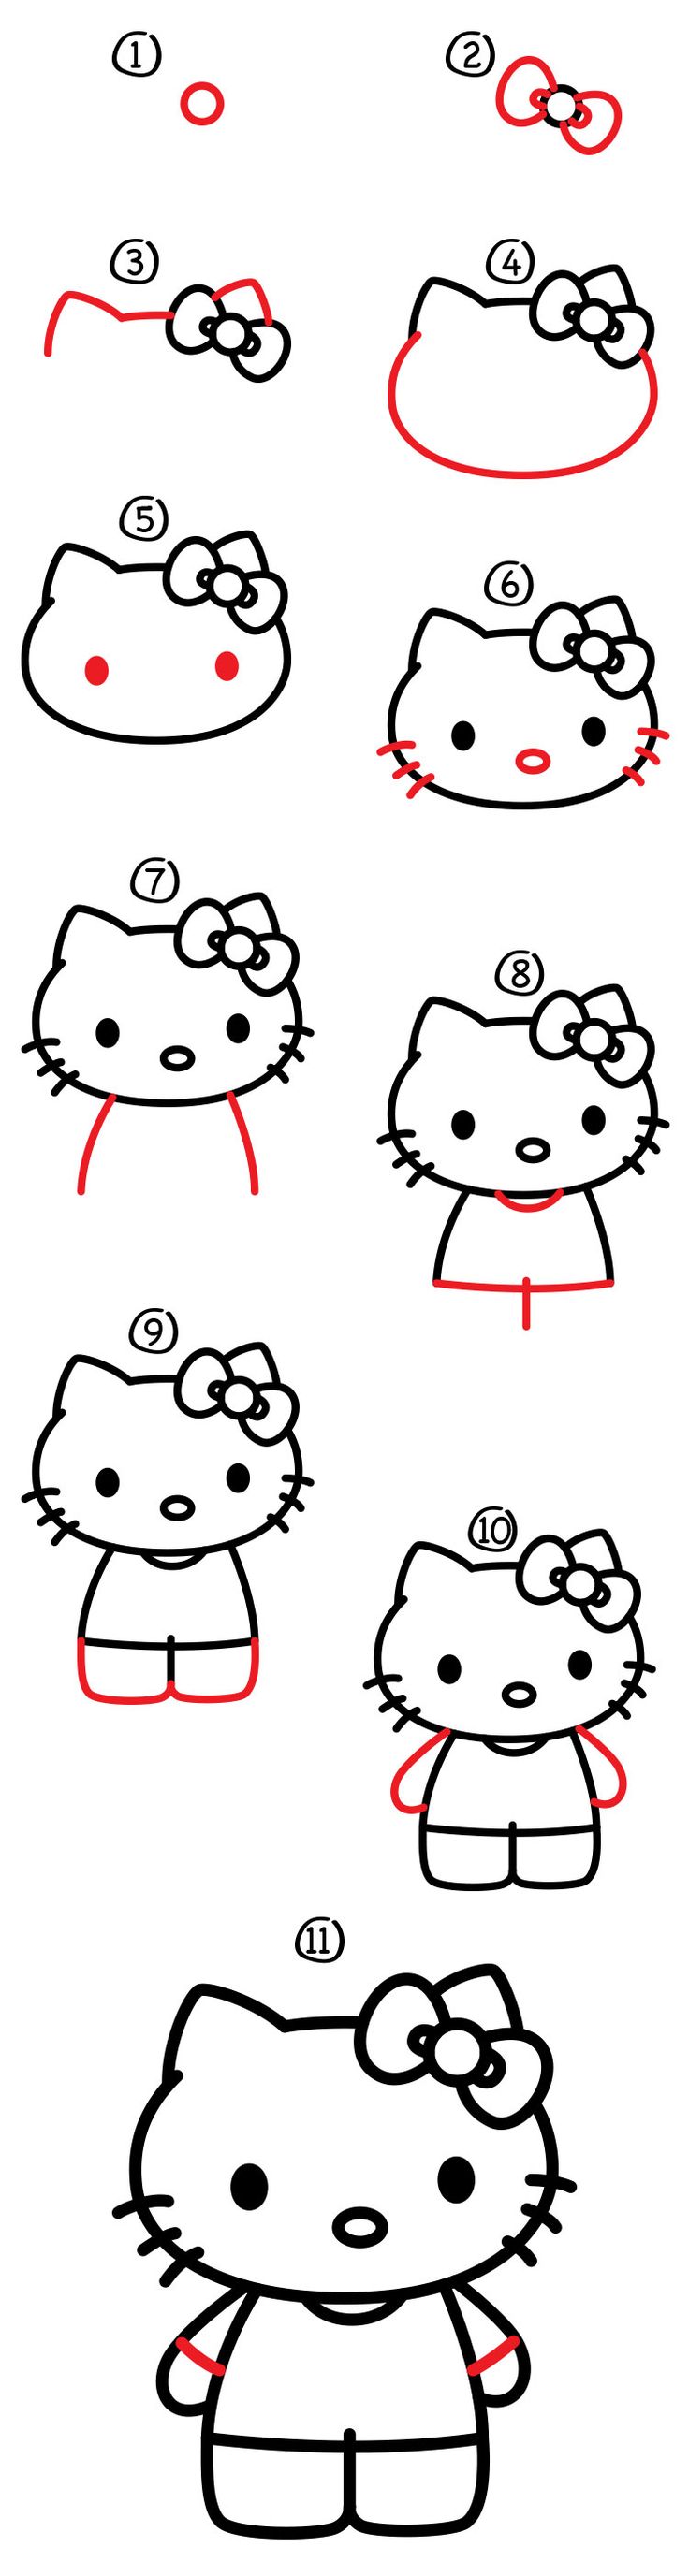 Follow along with us and learn how to draw Hello Kitty. Also be sure to visit th